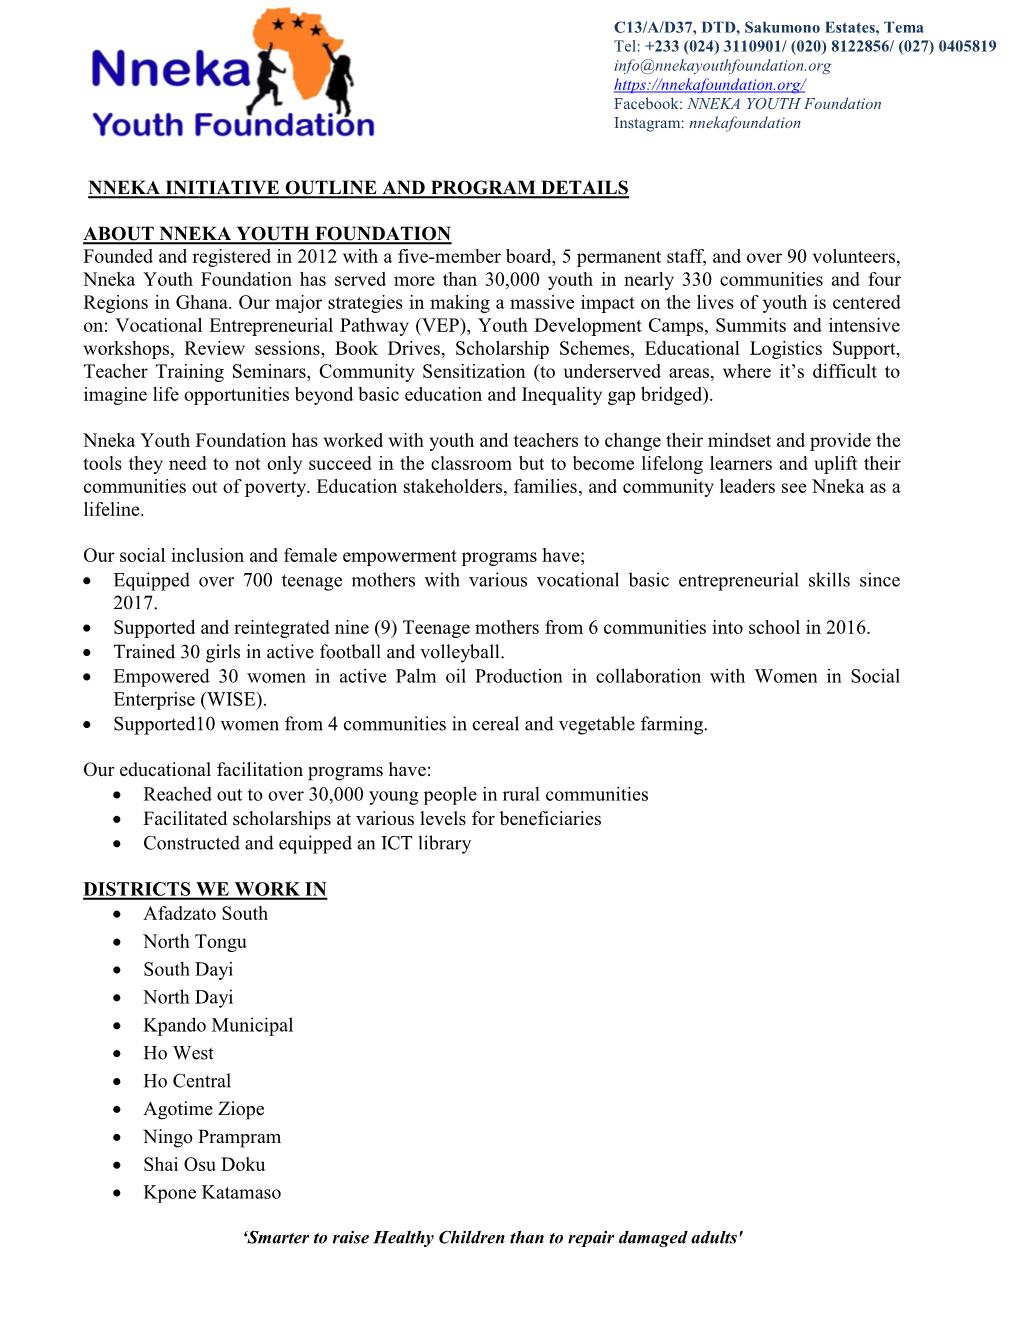 NNEKA INITIATIVE OUTLINE and PROGRAM DETAILS ABOUT NNEKA YOUTH FOUNDATION Founded and Registered in 2012 with a Five-Member Boar